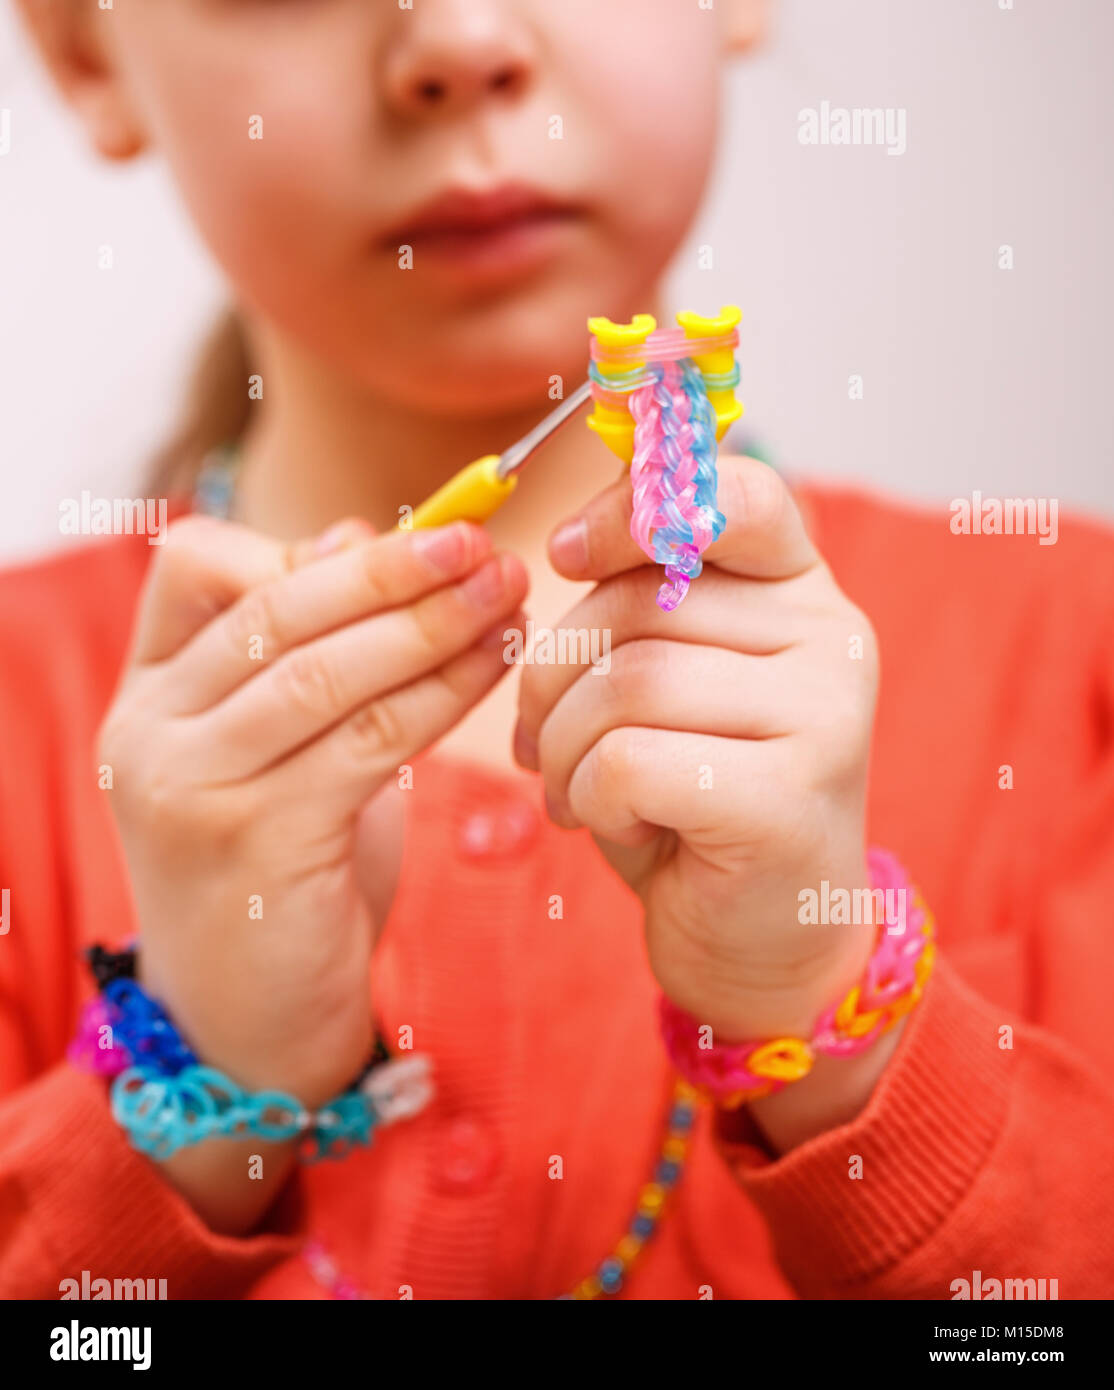 Colorful Rainbow loom bracelet rubber bands in a box Stock Photo